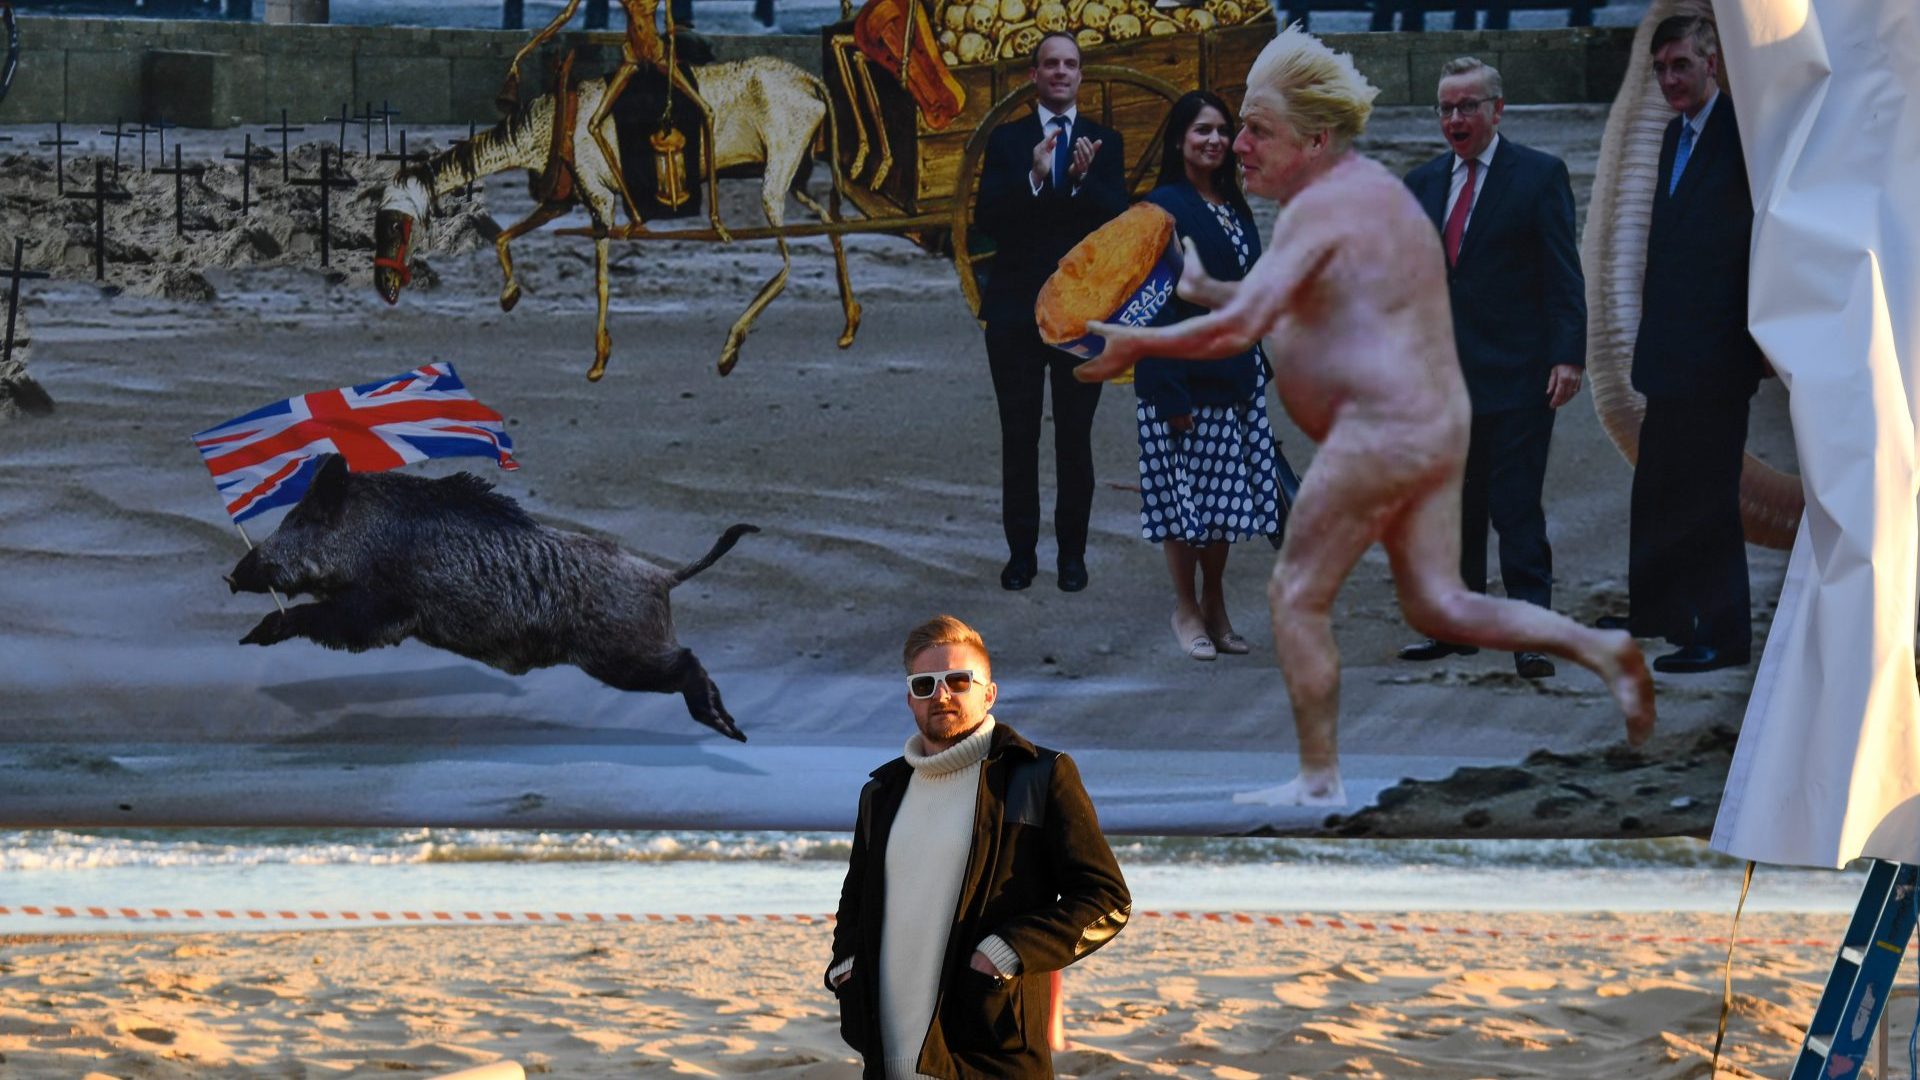 Christopher Spencer, aka: Cold War Steve poses in front of the censored artwork on Boscombe beach. Photo: Finnbarr Webster/Getty Images